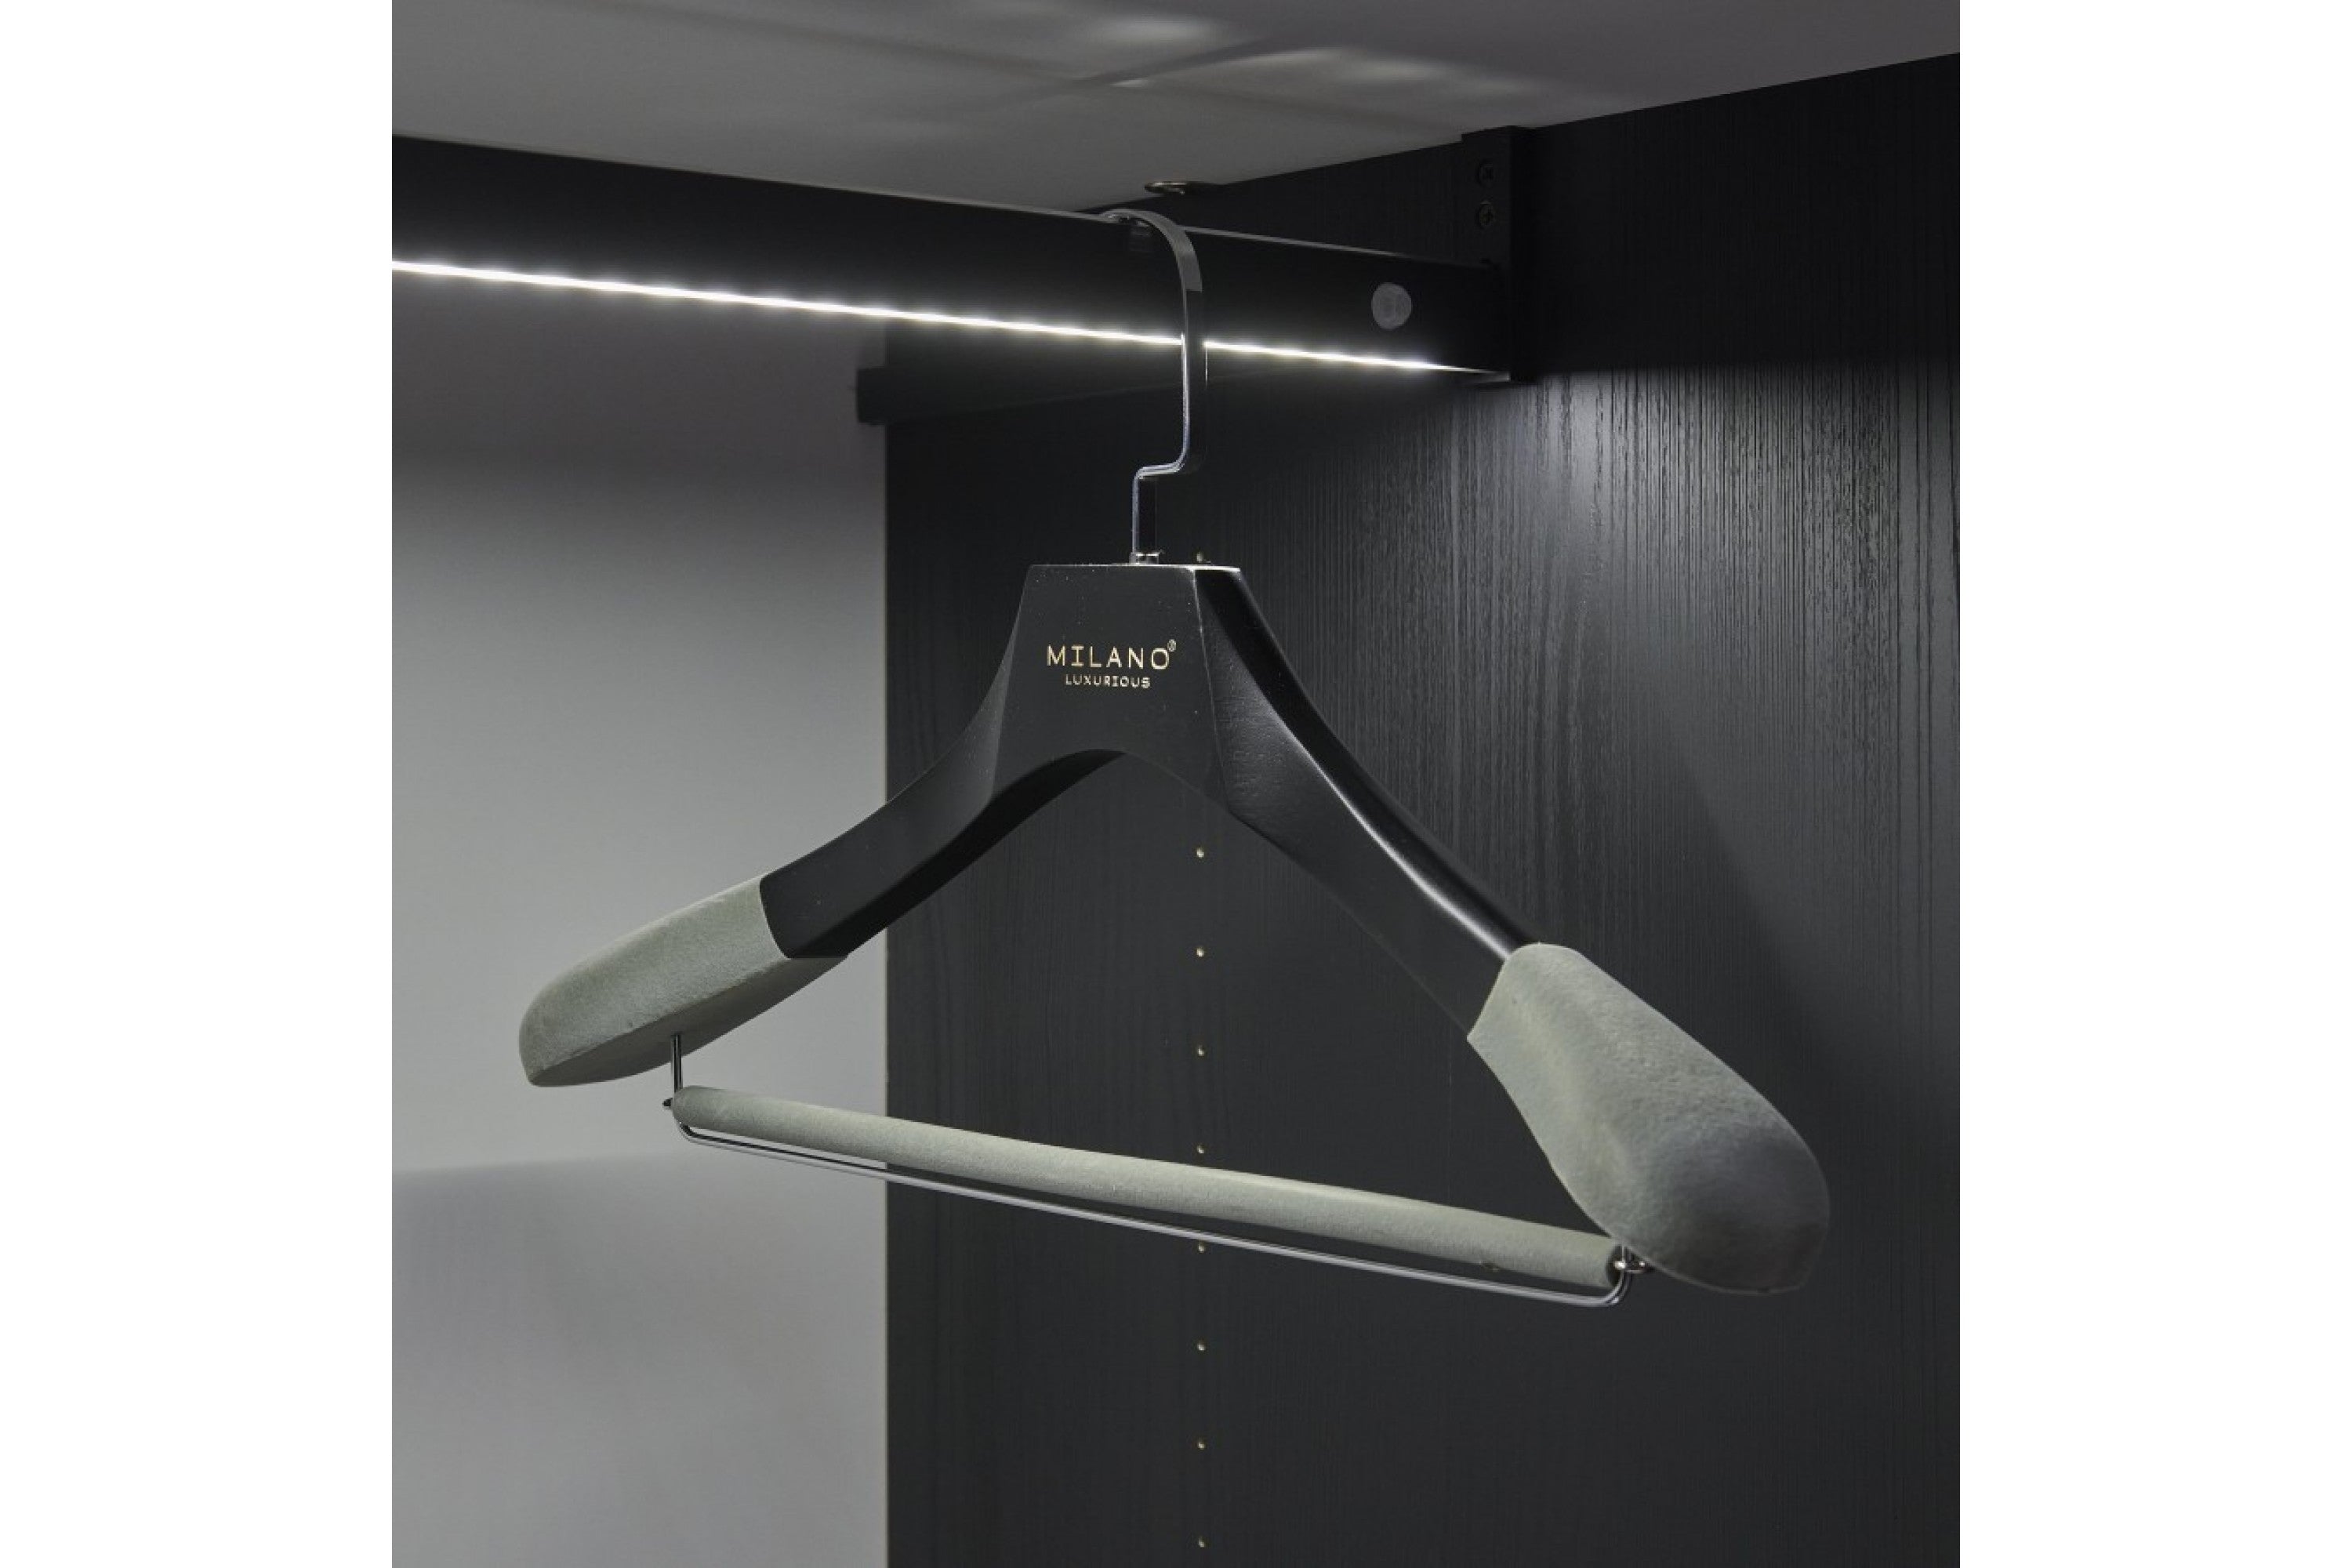 Milano Luxurious Chic gray velvet clothes hanger with trouser bar and chrome hook